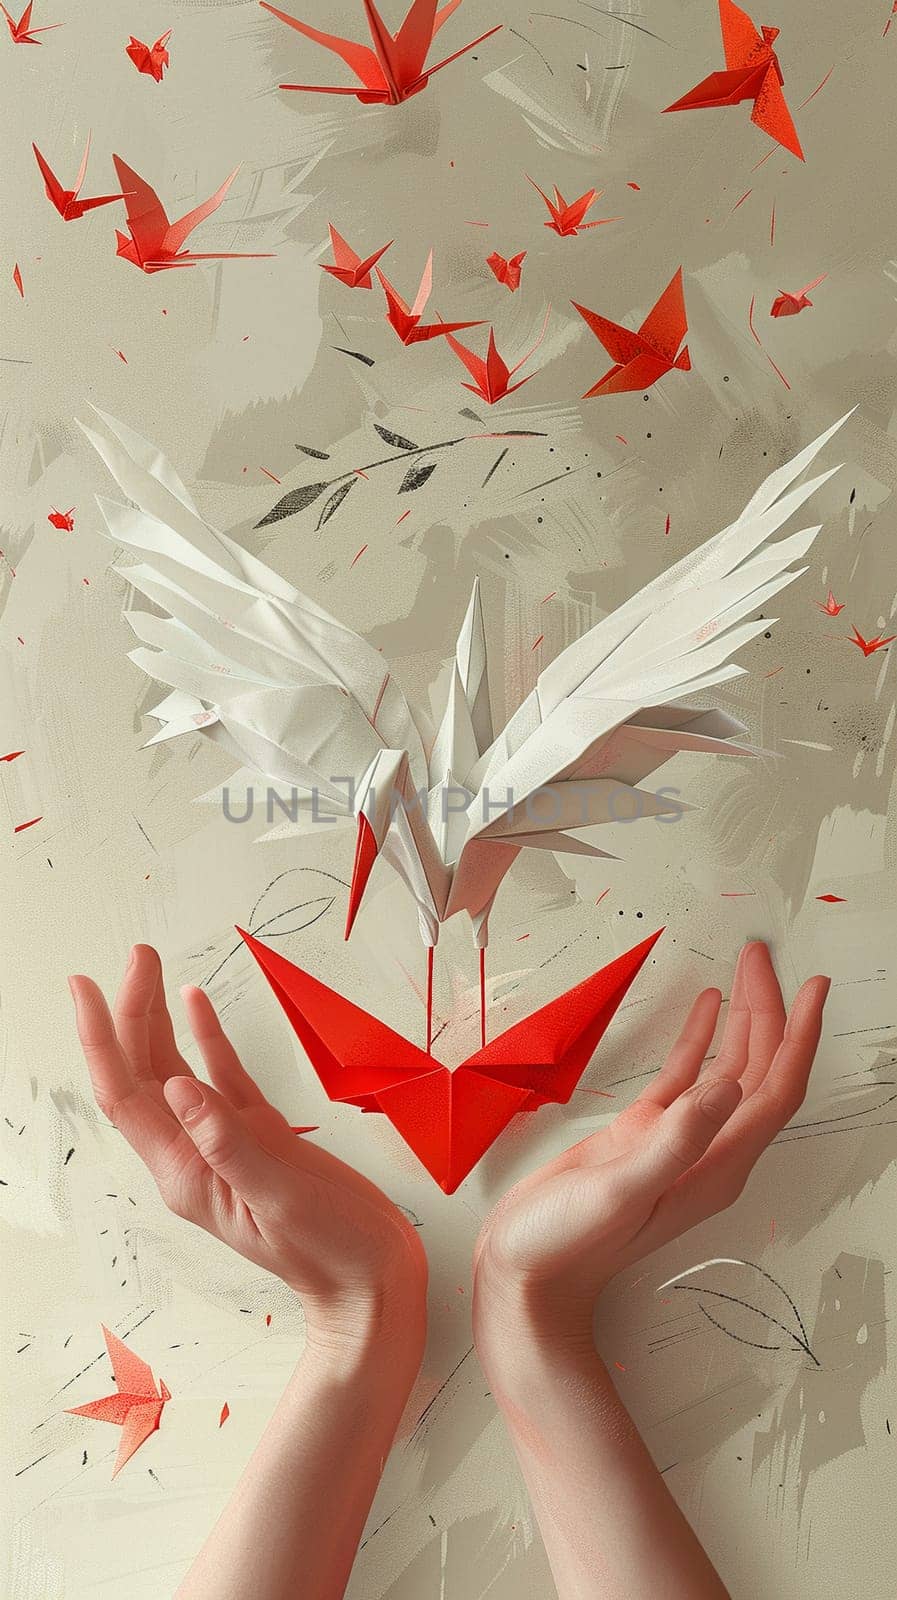 Hands shaping a delicate origami crane, illustrated in a minimalist style with clean lines and soft shadows.